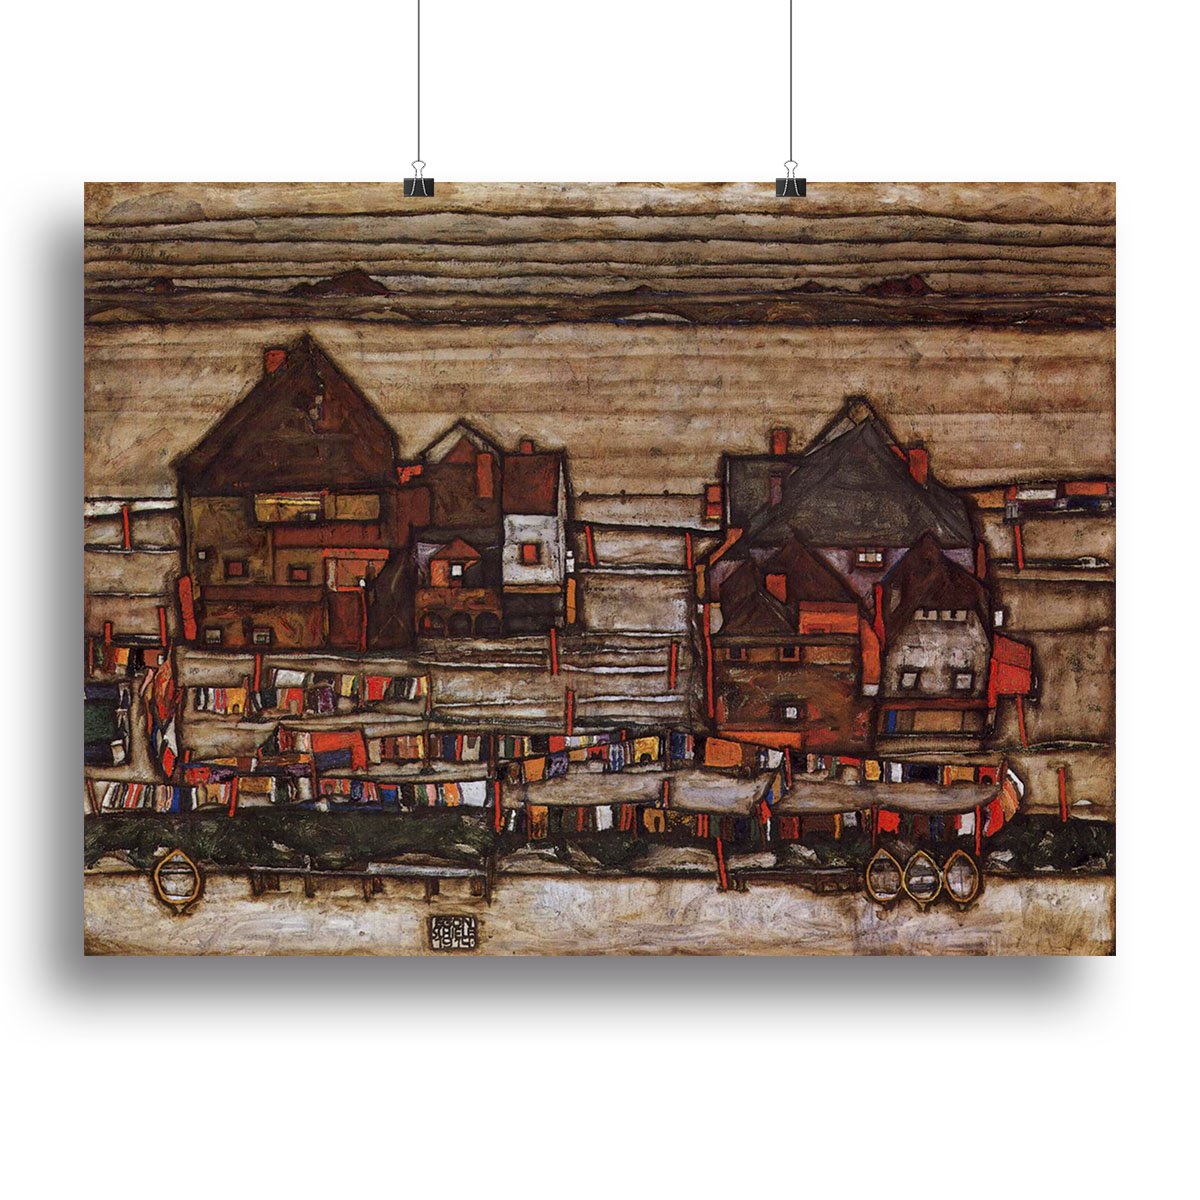 Houses with laundry lines and suburban by Egon Schiele Canvas Print or Poster